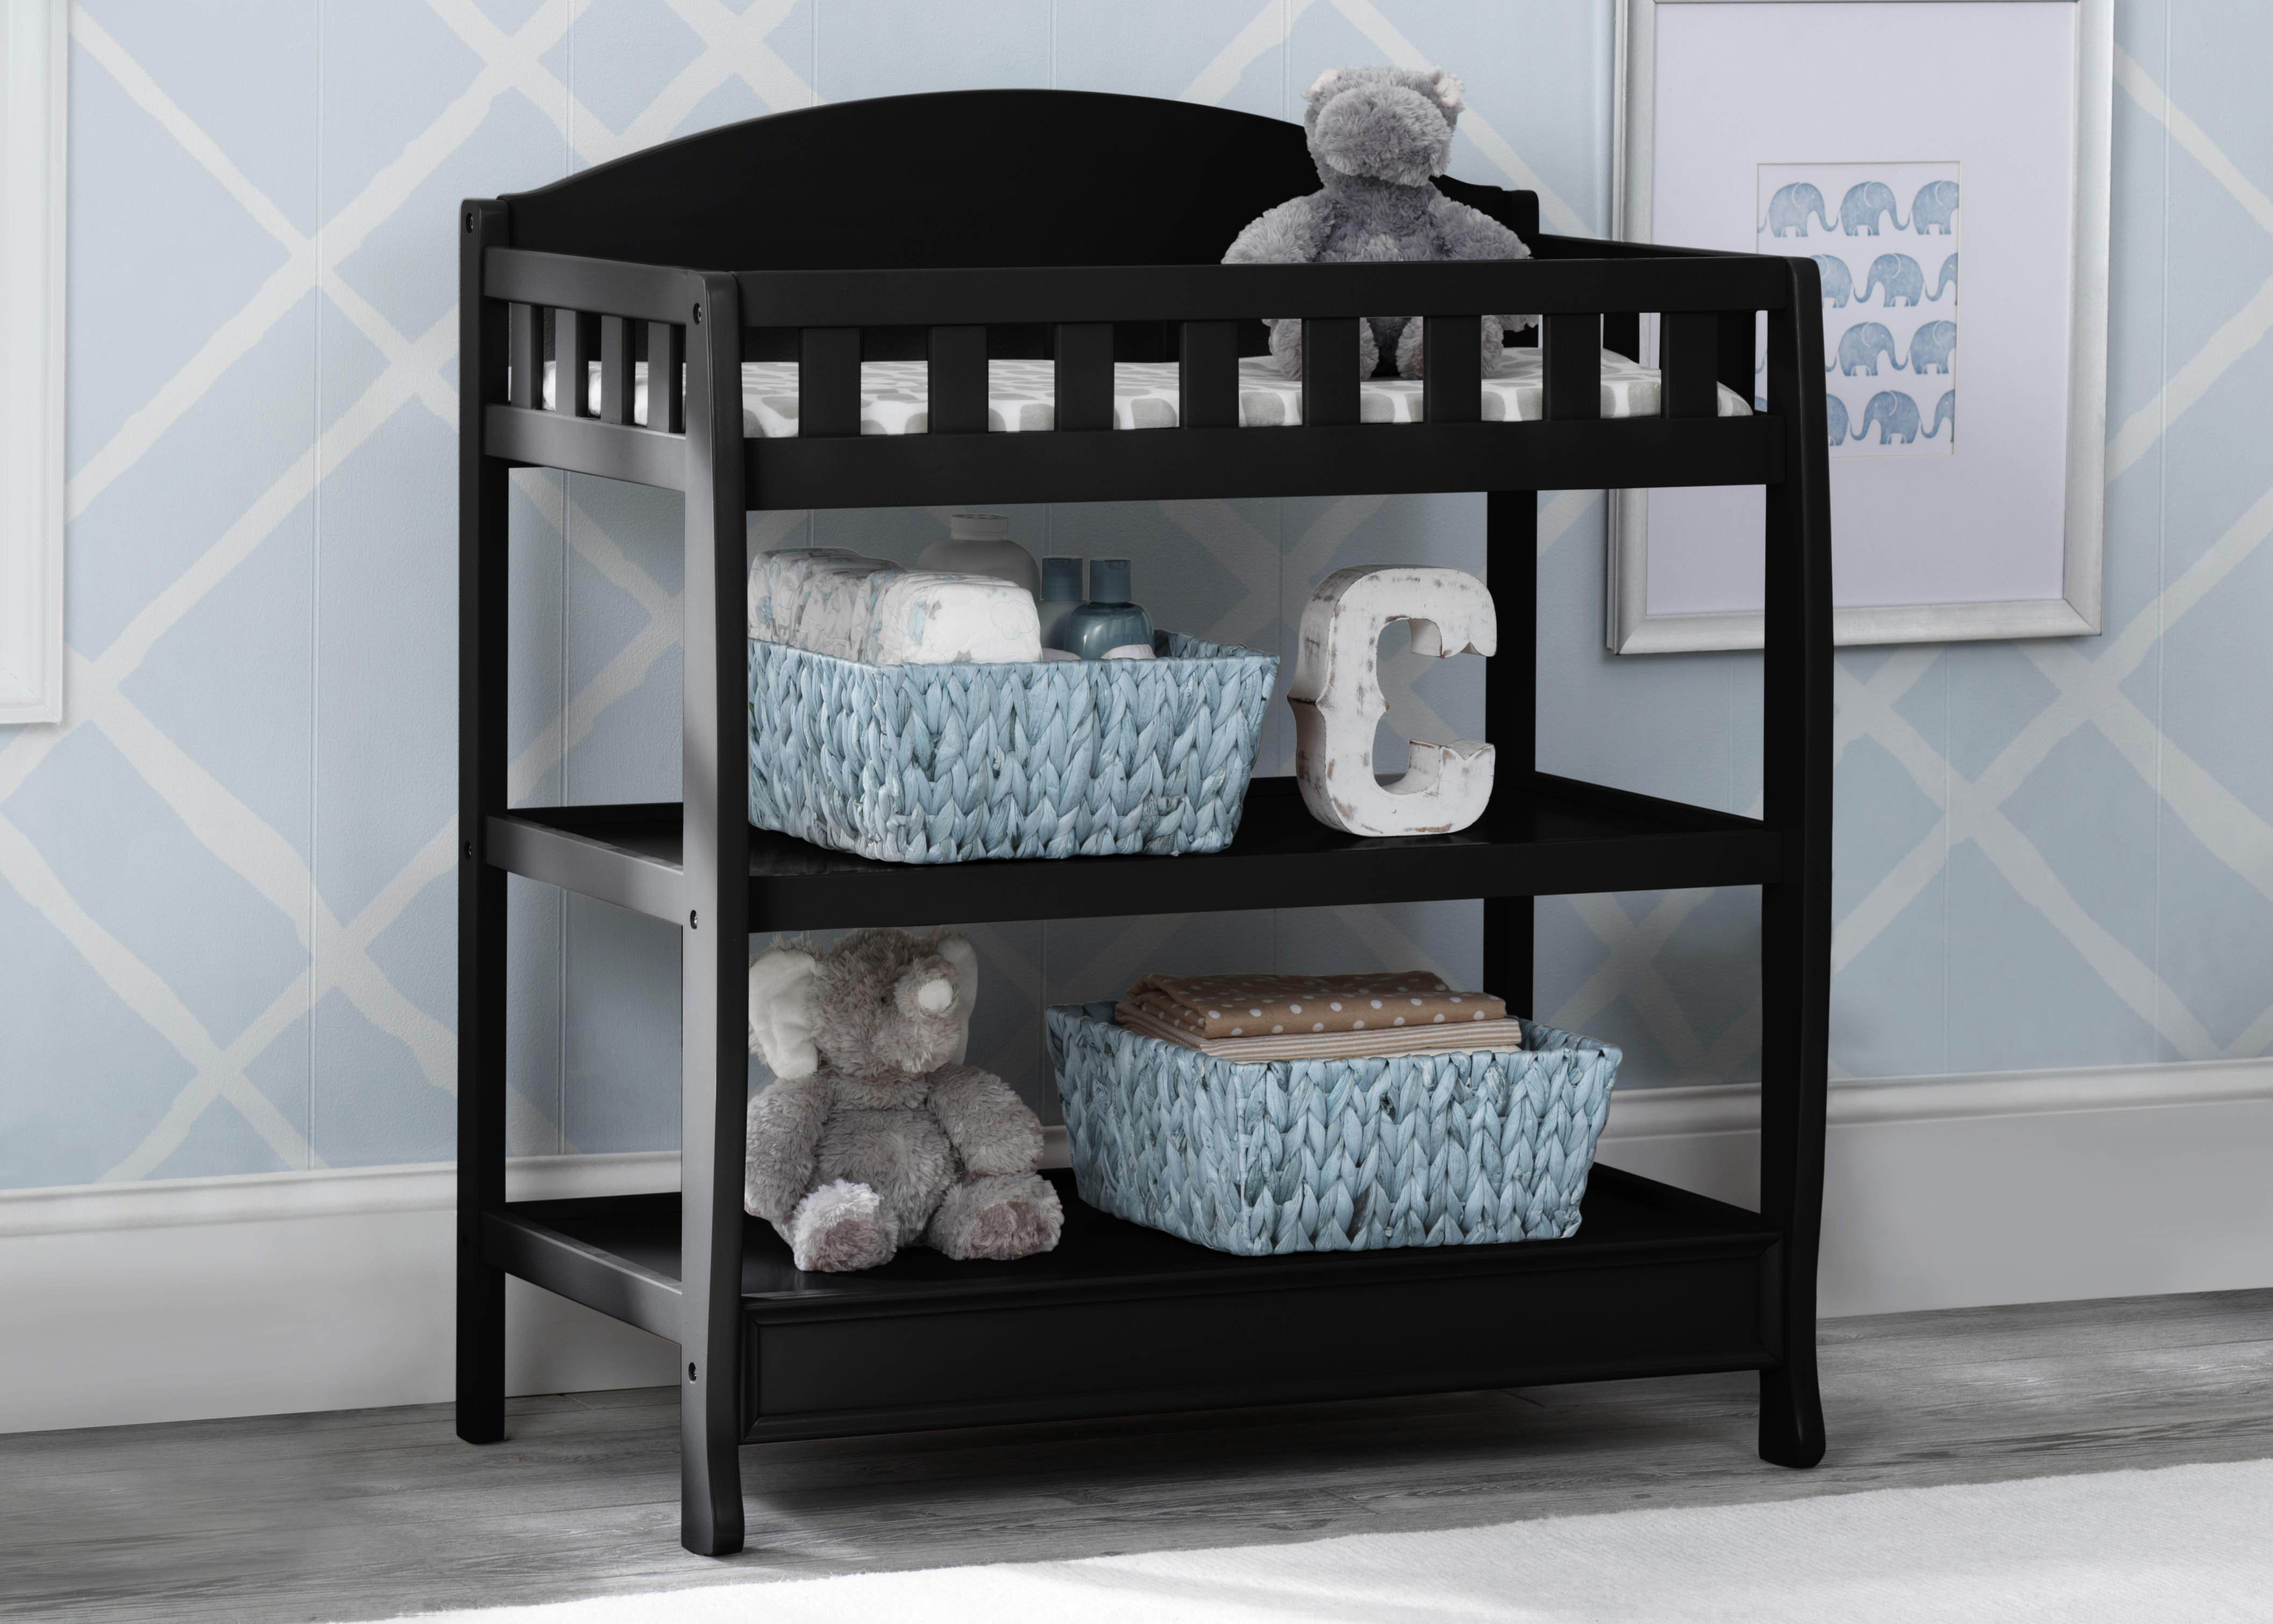 Delta Children Wilmington Changing Table with Pad, Ebony Black - image 2 of 8